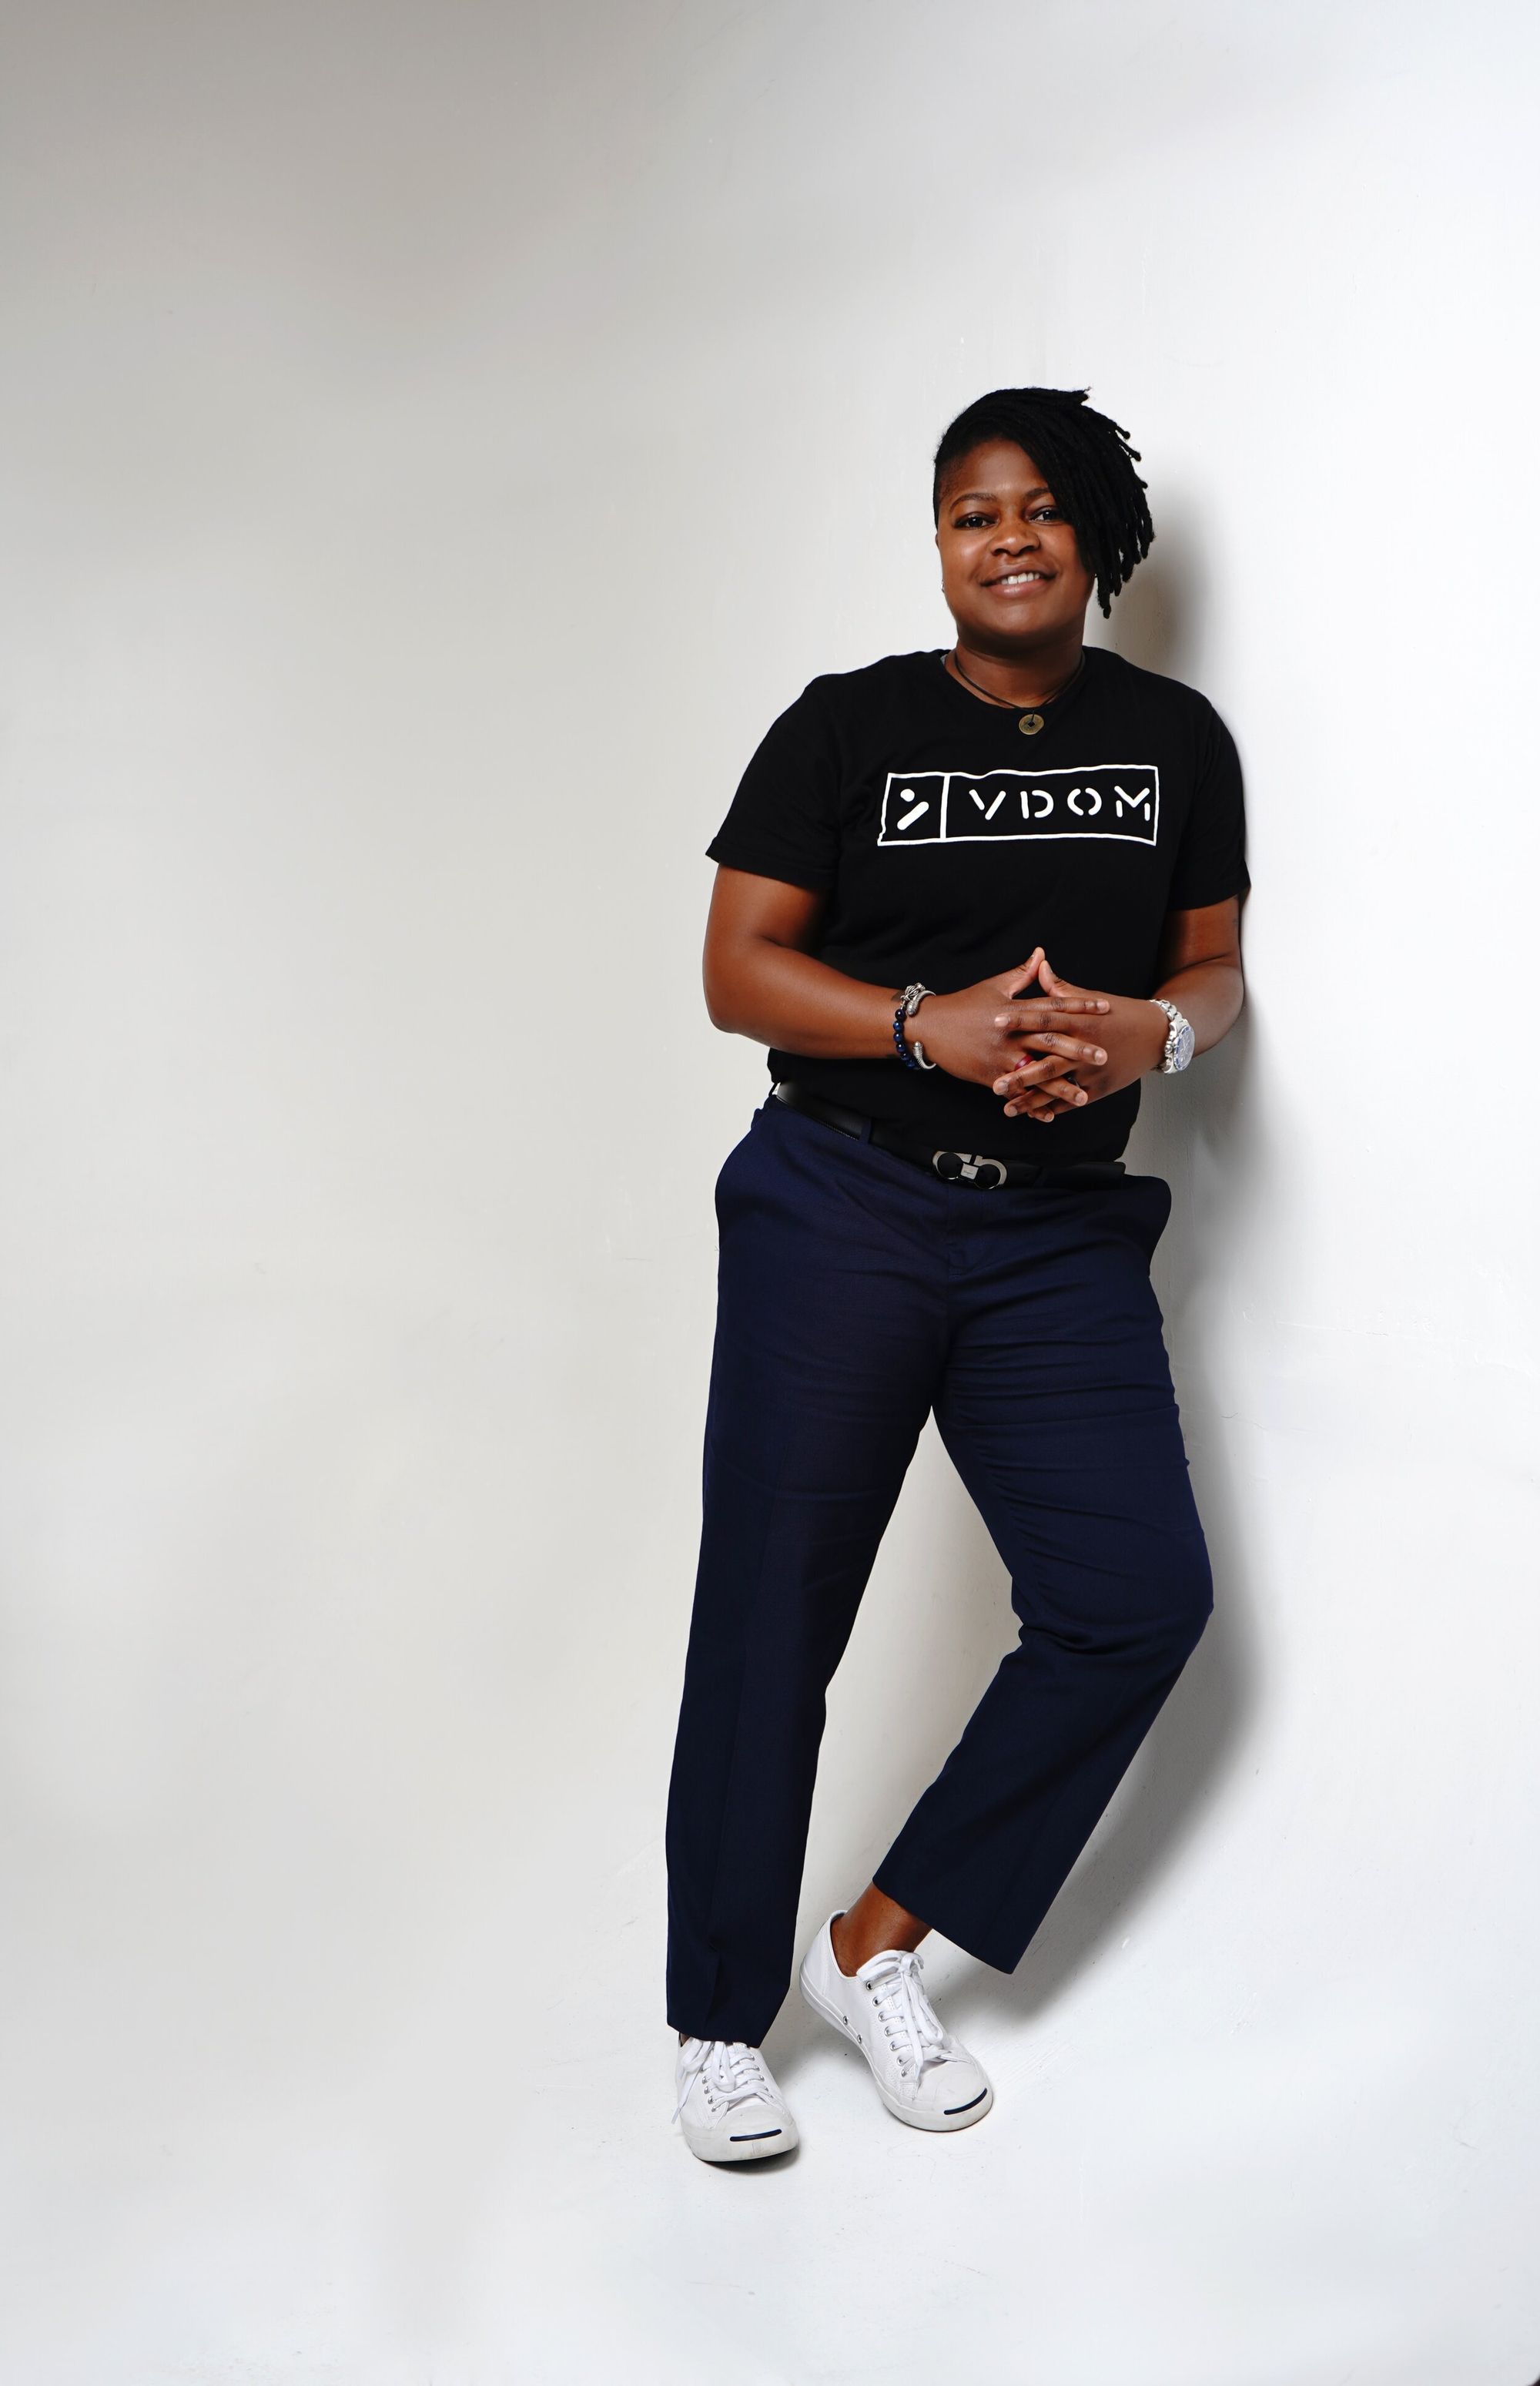 1-on-1 with Glenise Kinard-Moore, the Creator of The VDOM